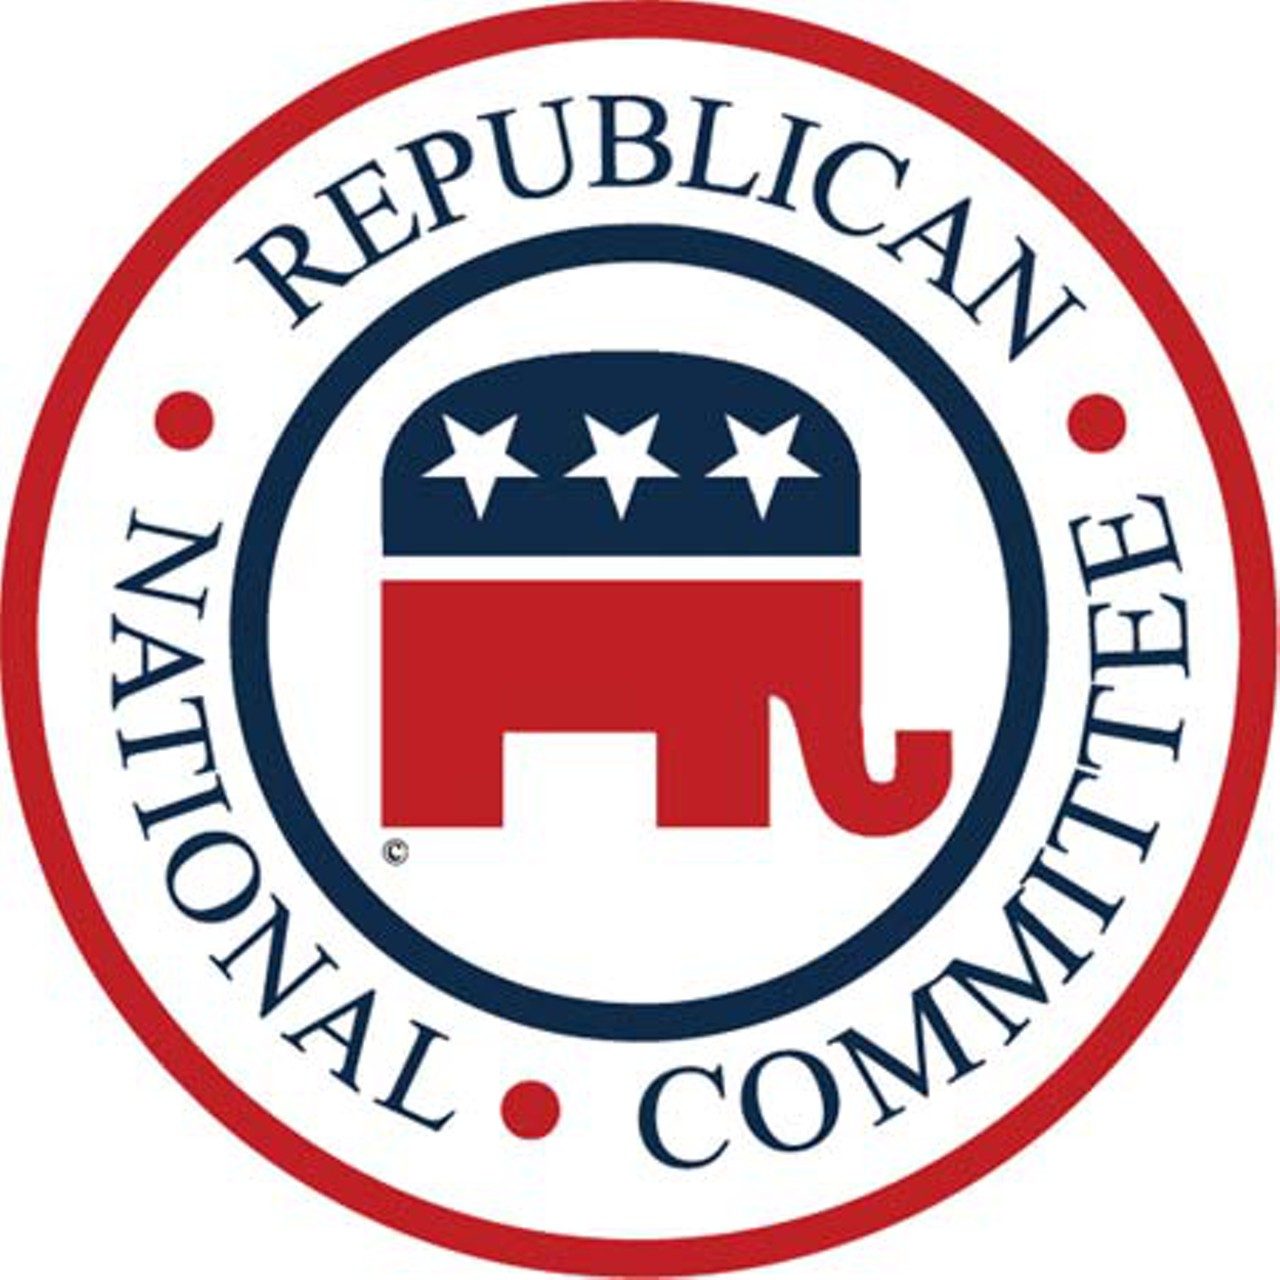 Sentencing Law and Policy: Republican National Committee adopts ...